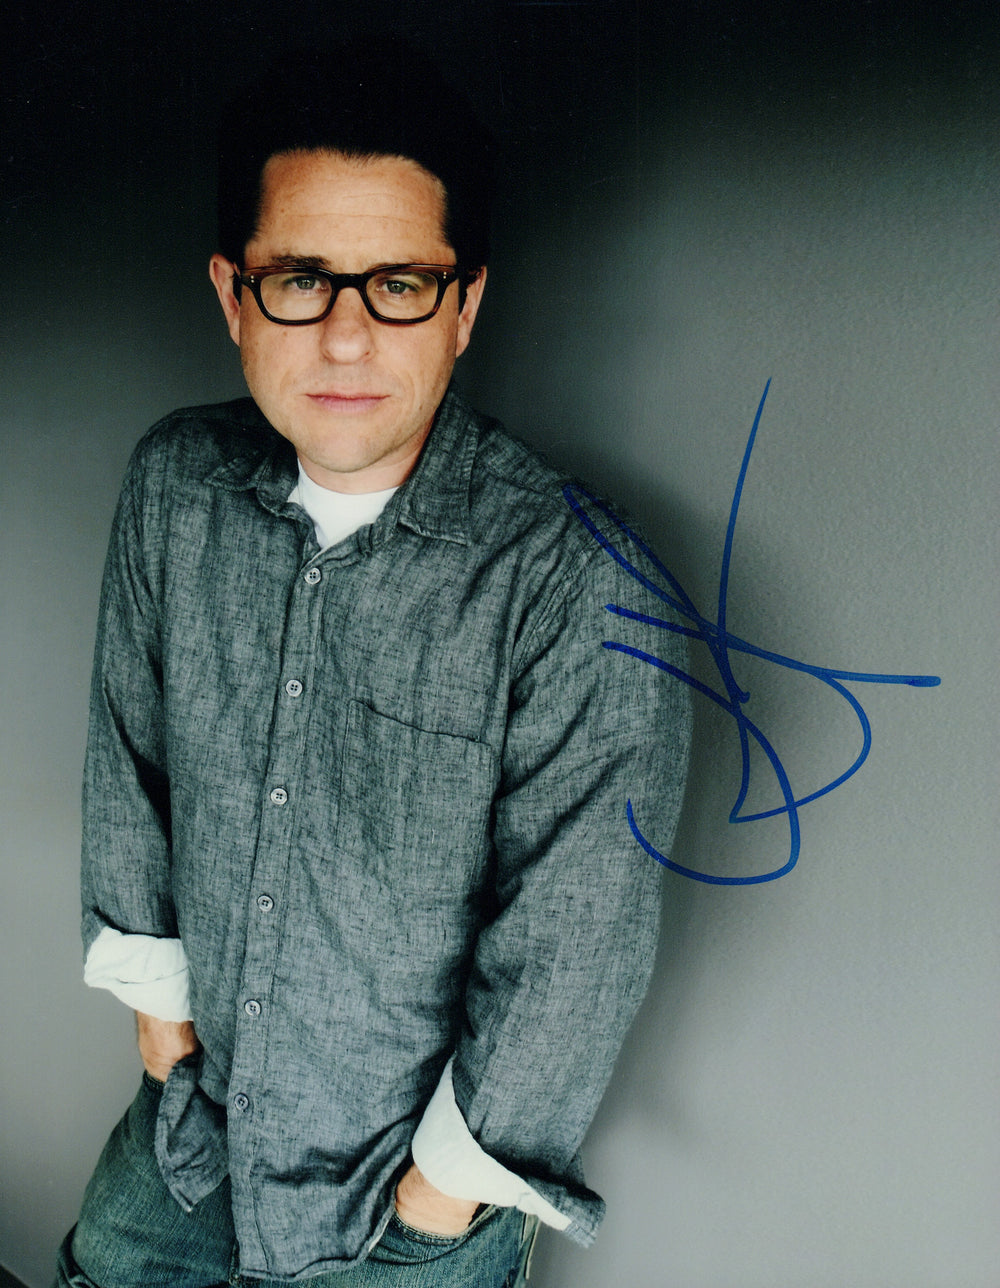 J.J. Abrams Director of Star Wars: The Force Awakens Signed 8x10 Photo